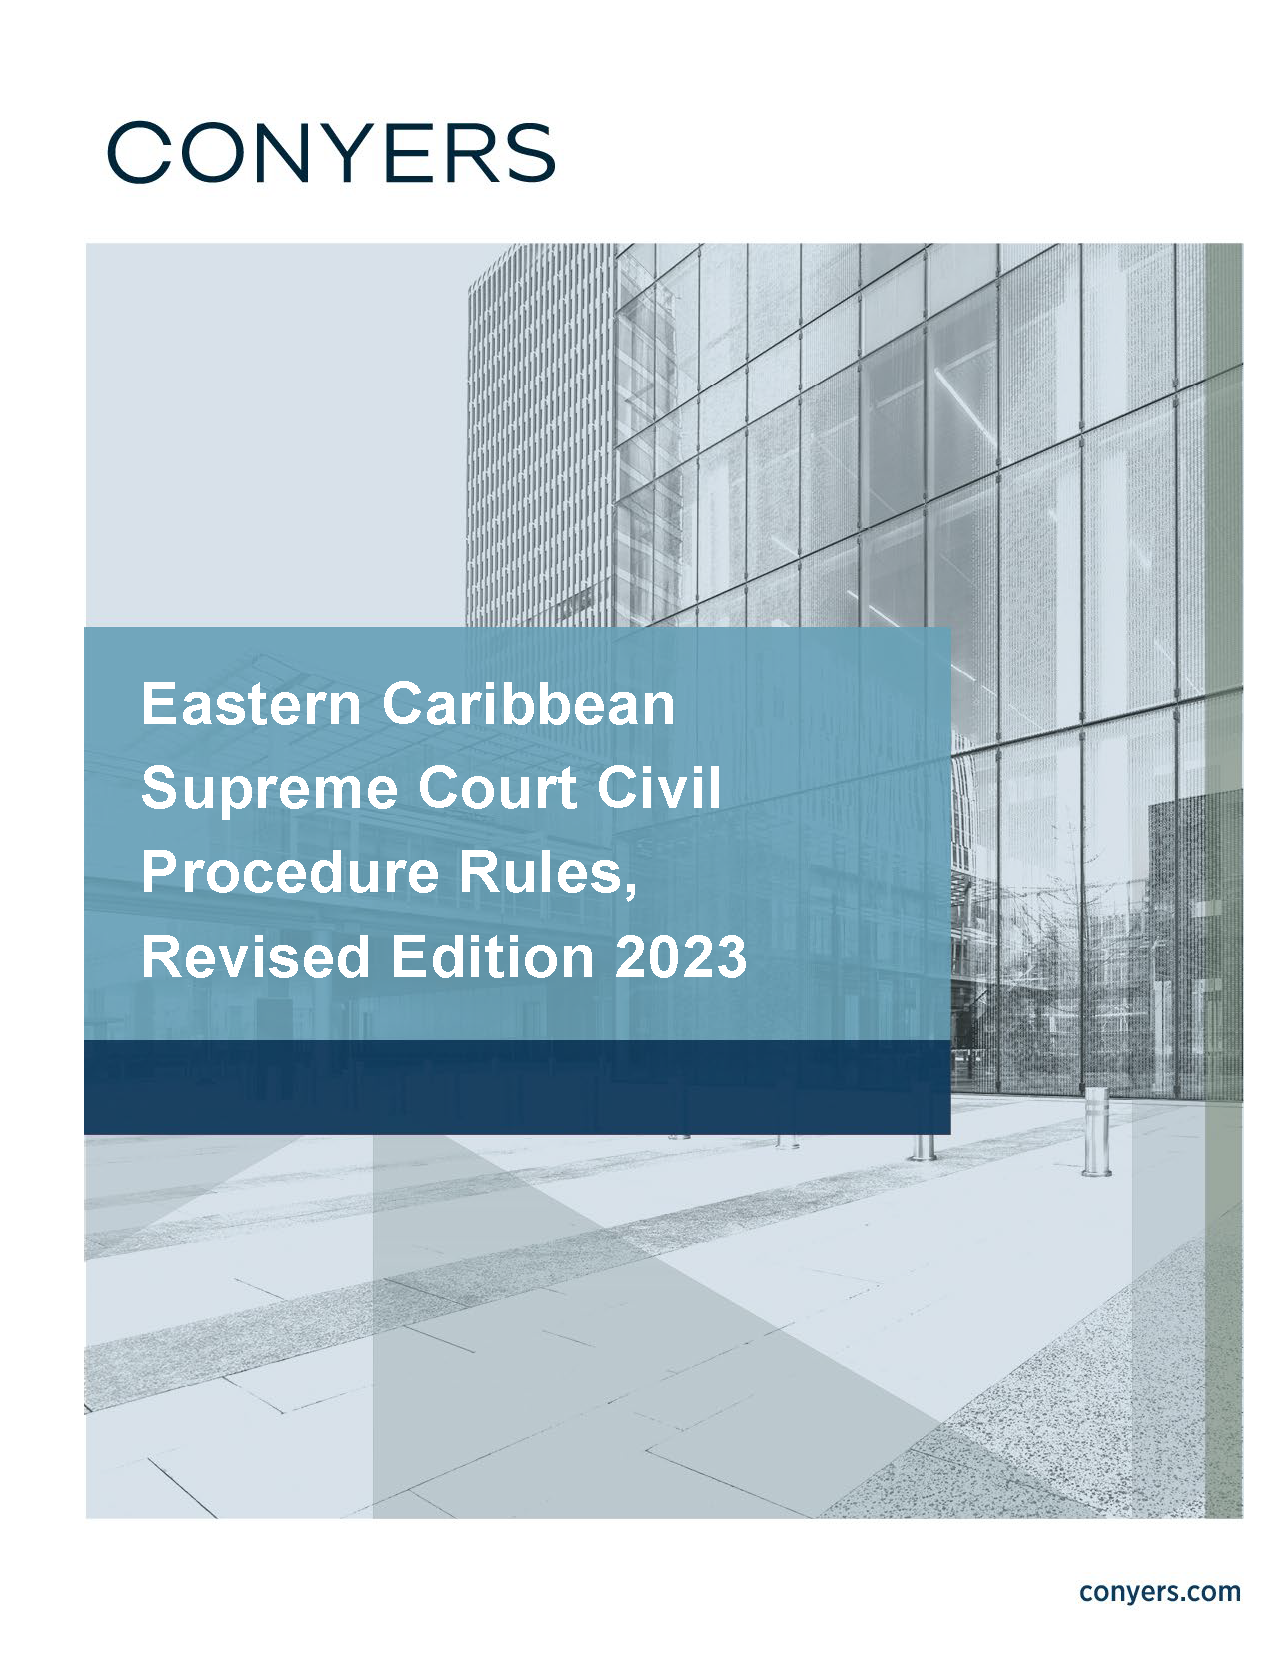 Eastern Caribbean Supreme Court Civil Procedure Rules Revised Edition 2023 - Cover Image